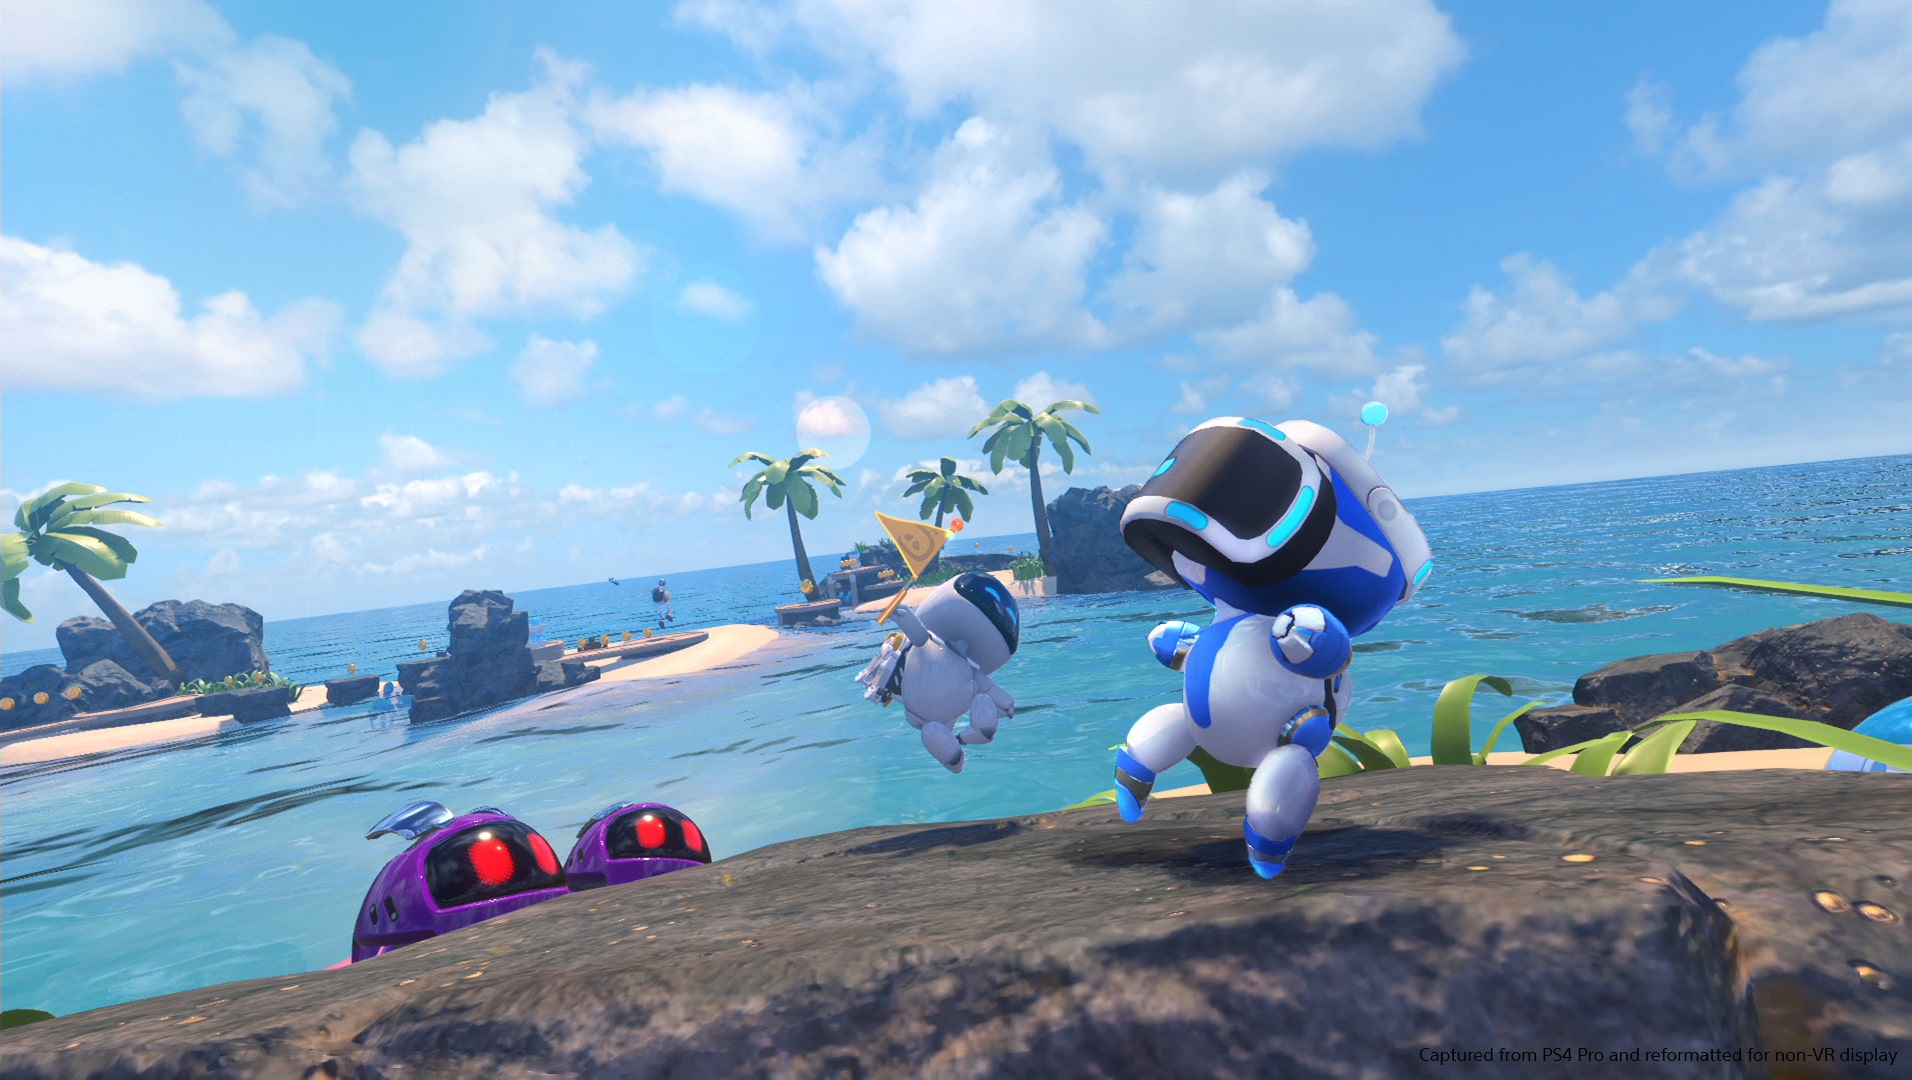 astro bot playstation store